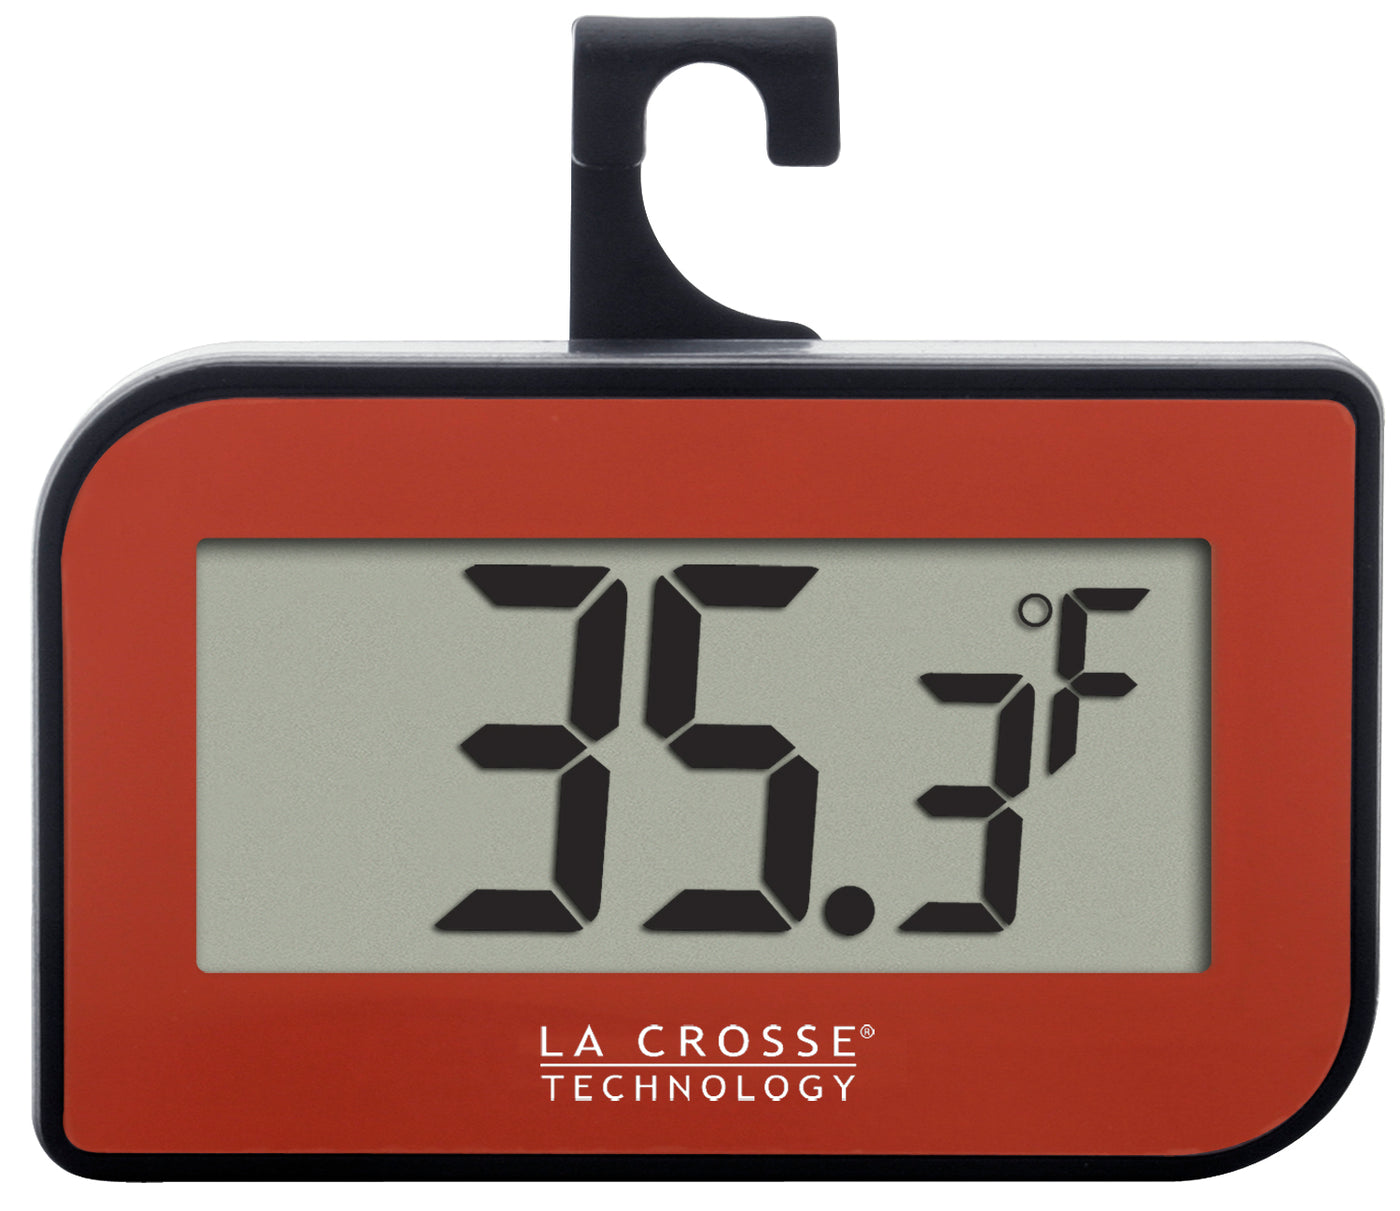 S1 Magnetic Analog Surface Thermometer (Multipack) – Measure and Test